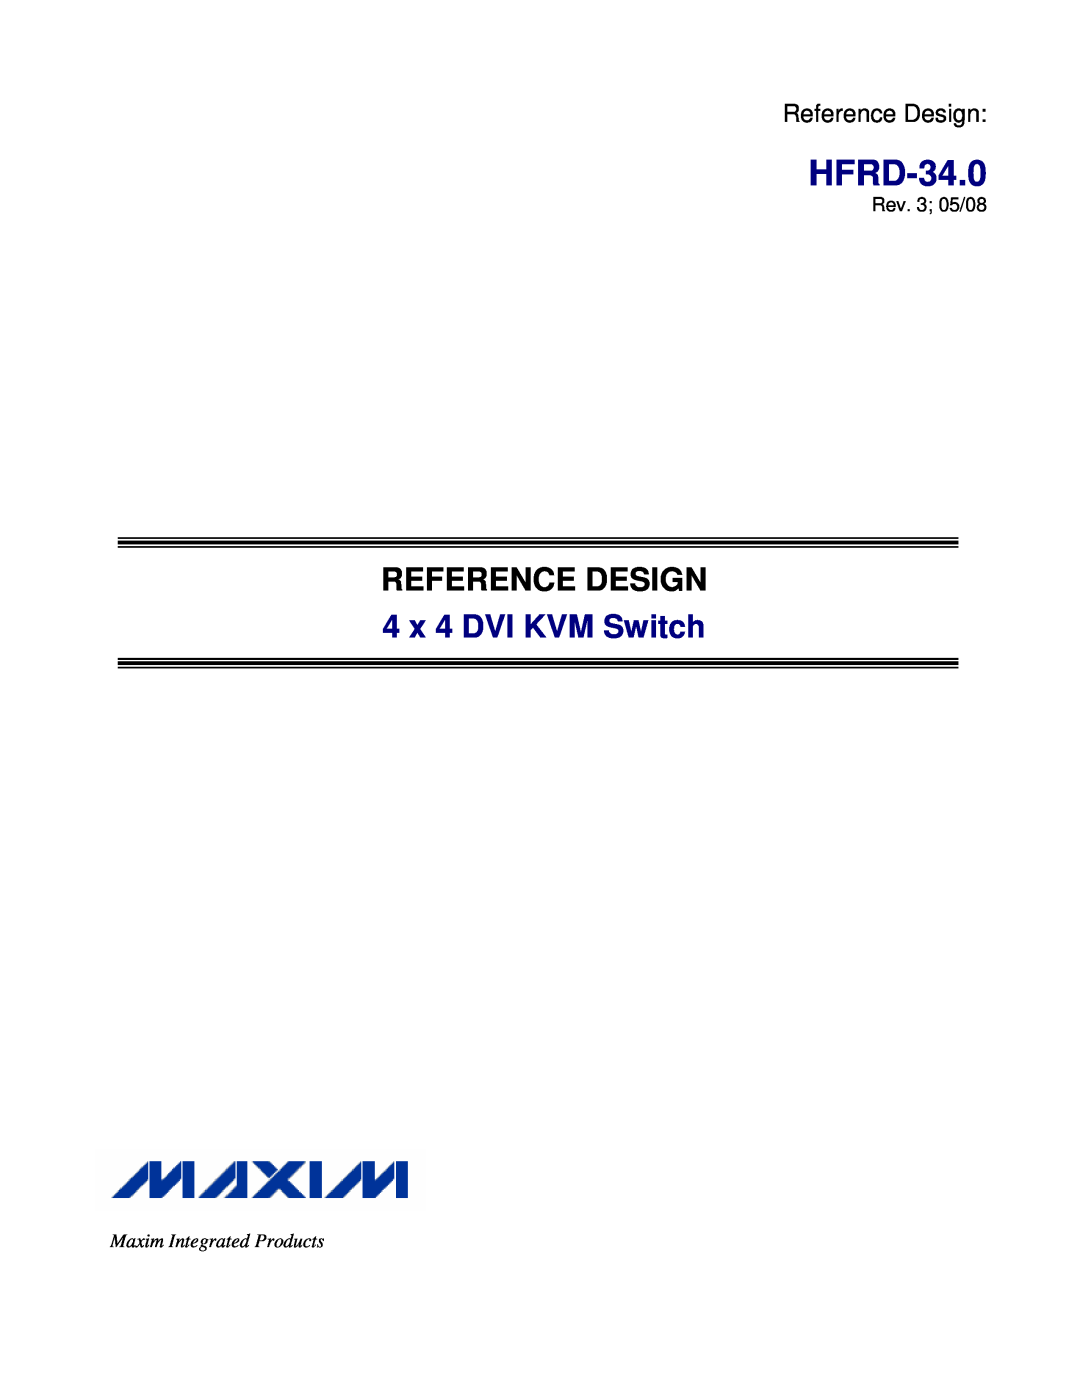 Maxim HFRD-34.0 manual Reference Design, 4 x 4 DVI KVM Switch, Rev. 3 05/08, Maxim Integrated Products 